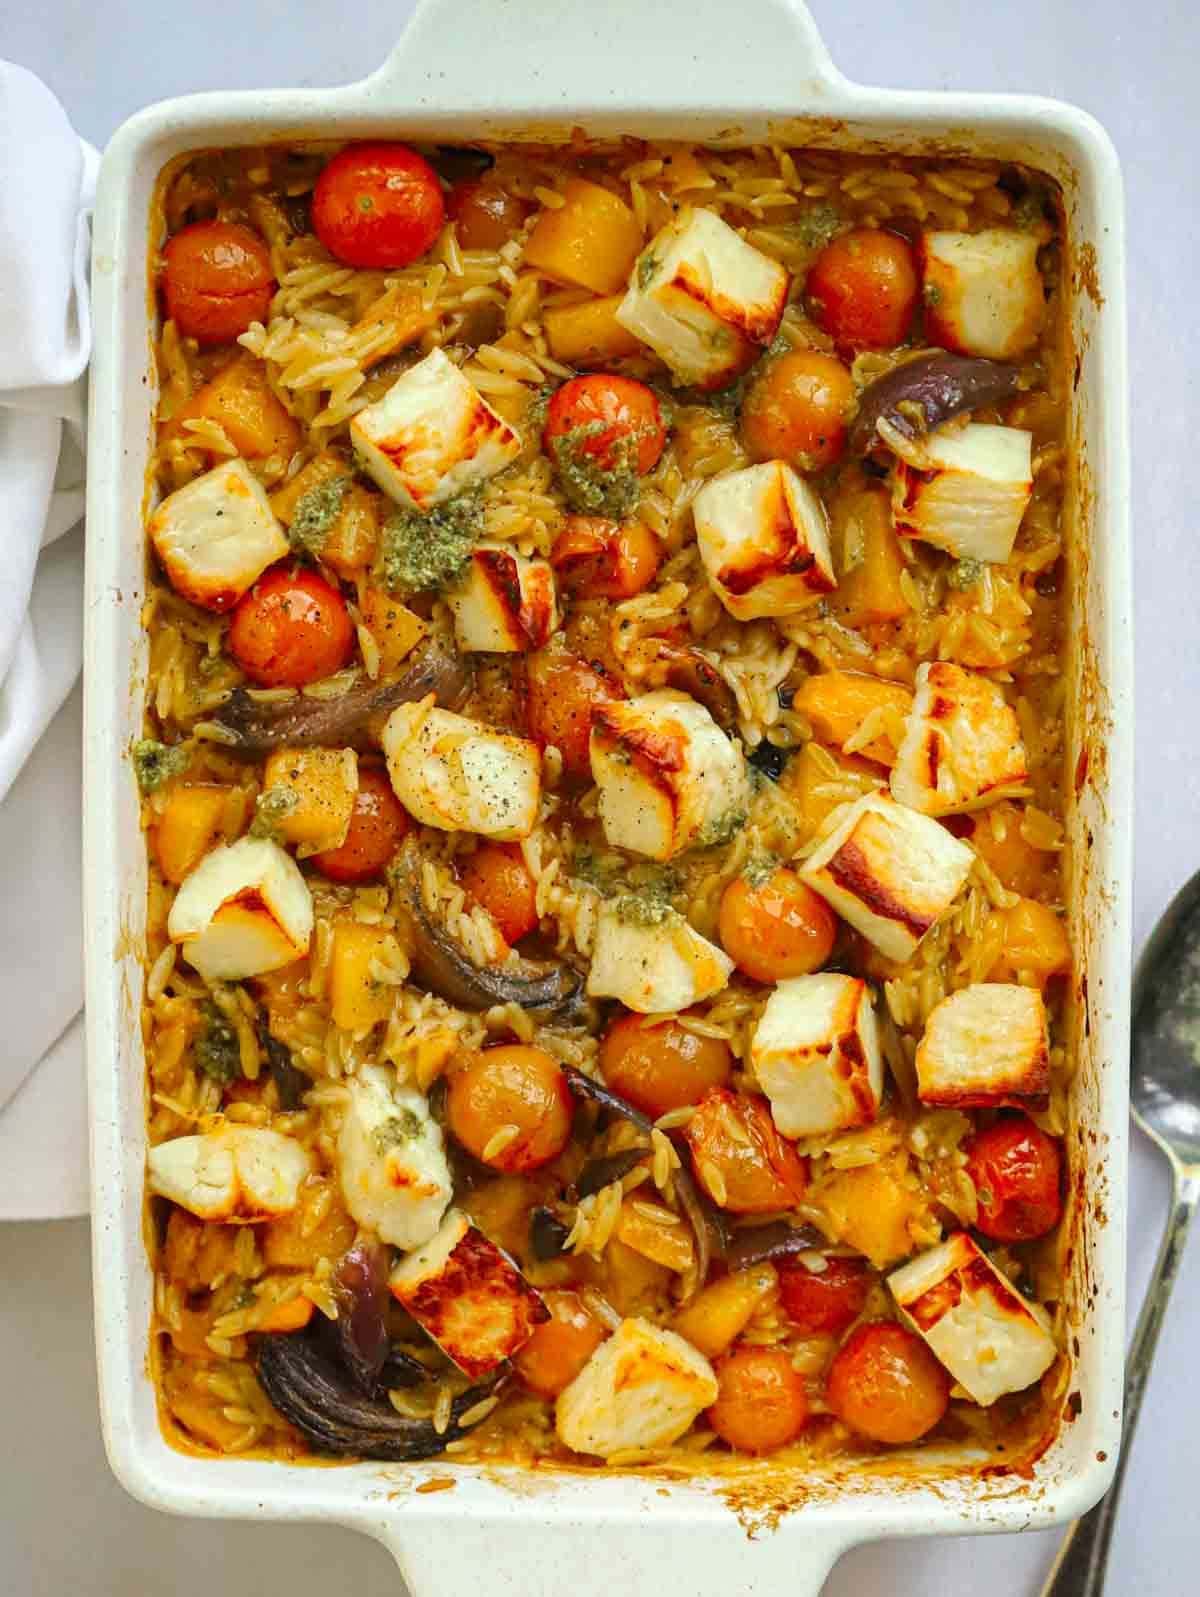 An oven dish filled with Butternut Squash and Halloumi Orzo Bake with cherry tomatoes.